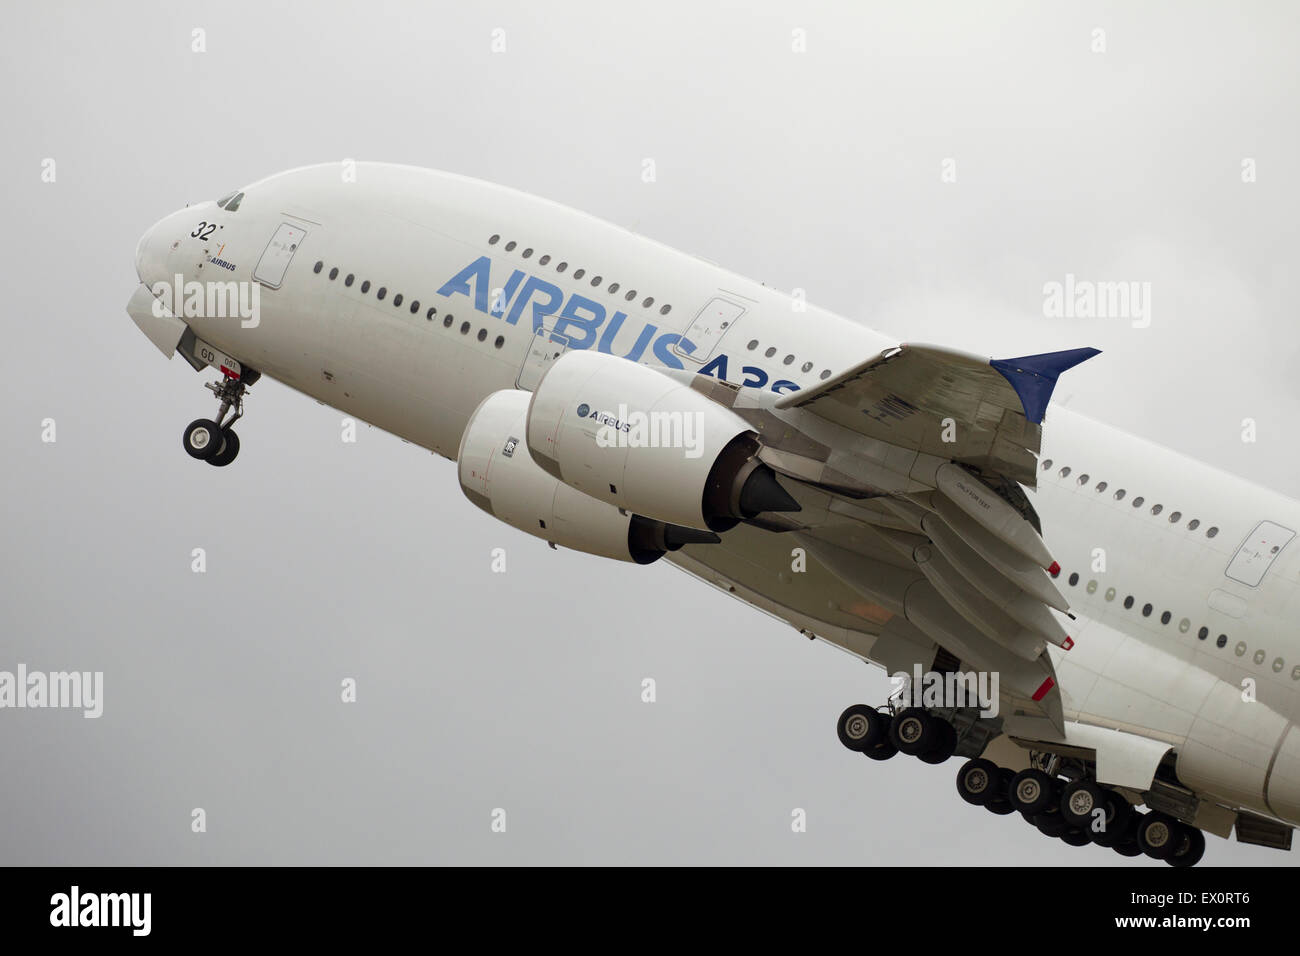 Airbus 380 taking off at the 2015 Le Bourget airshow Stock Photo